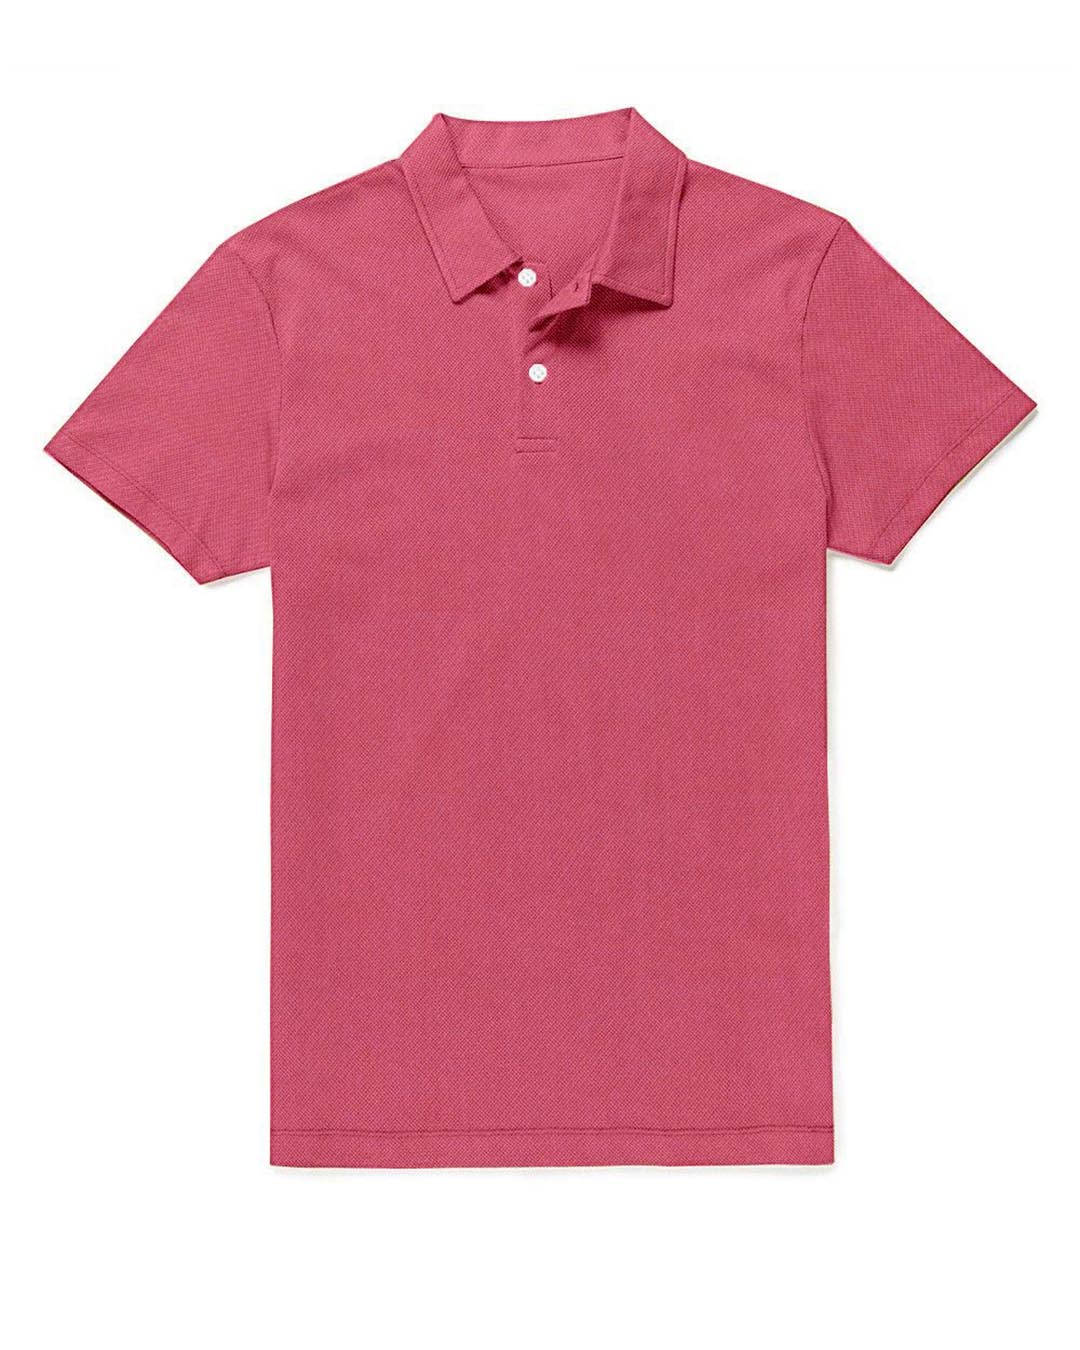 Front of the custom oxford polo shirt for men by Luxire in pink